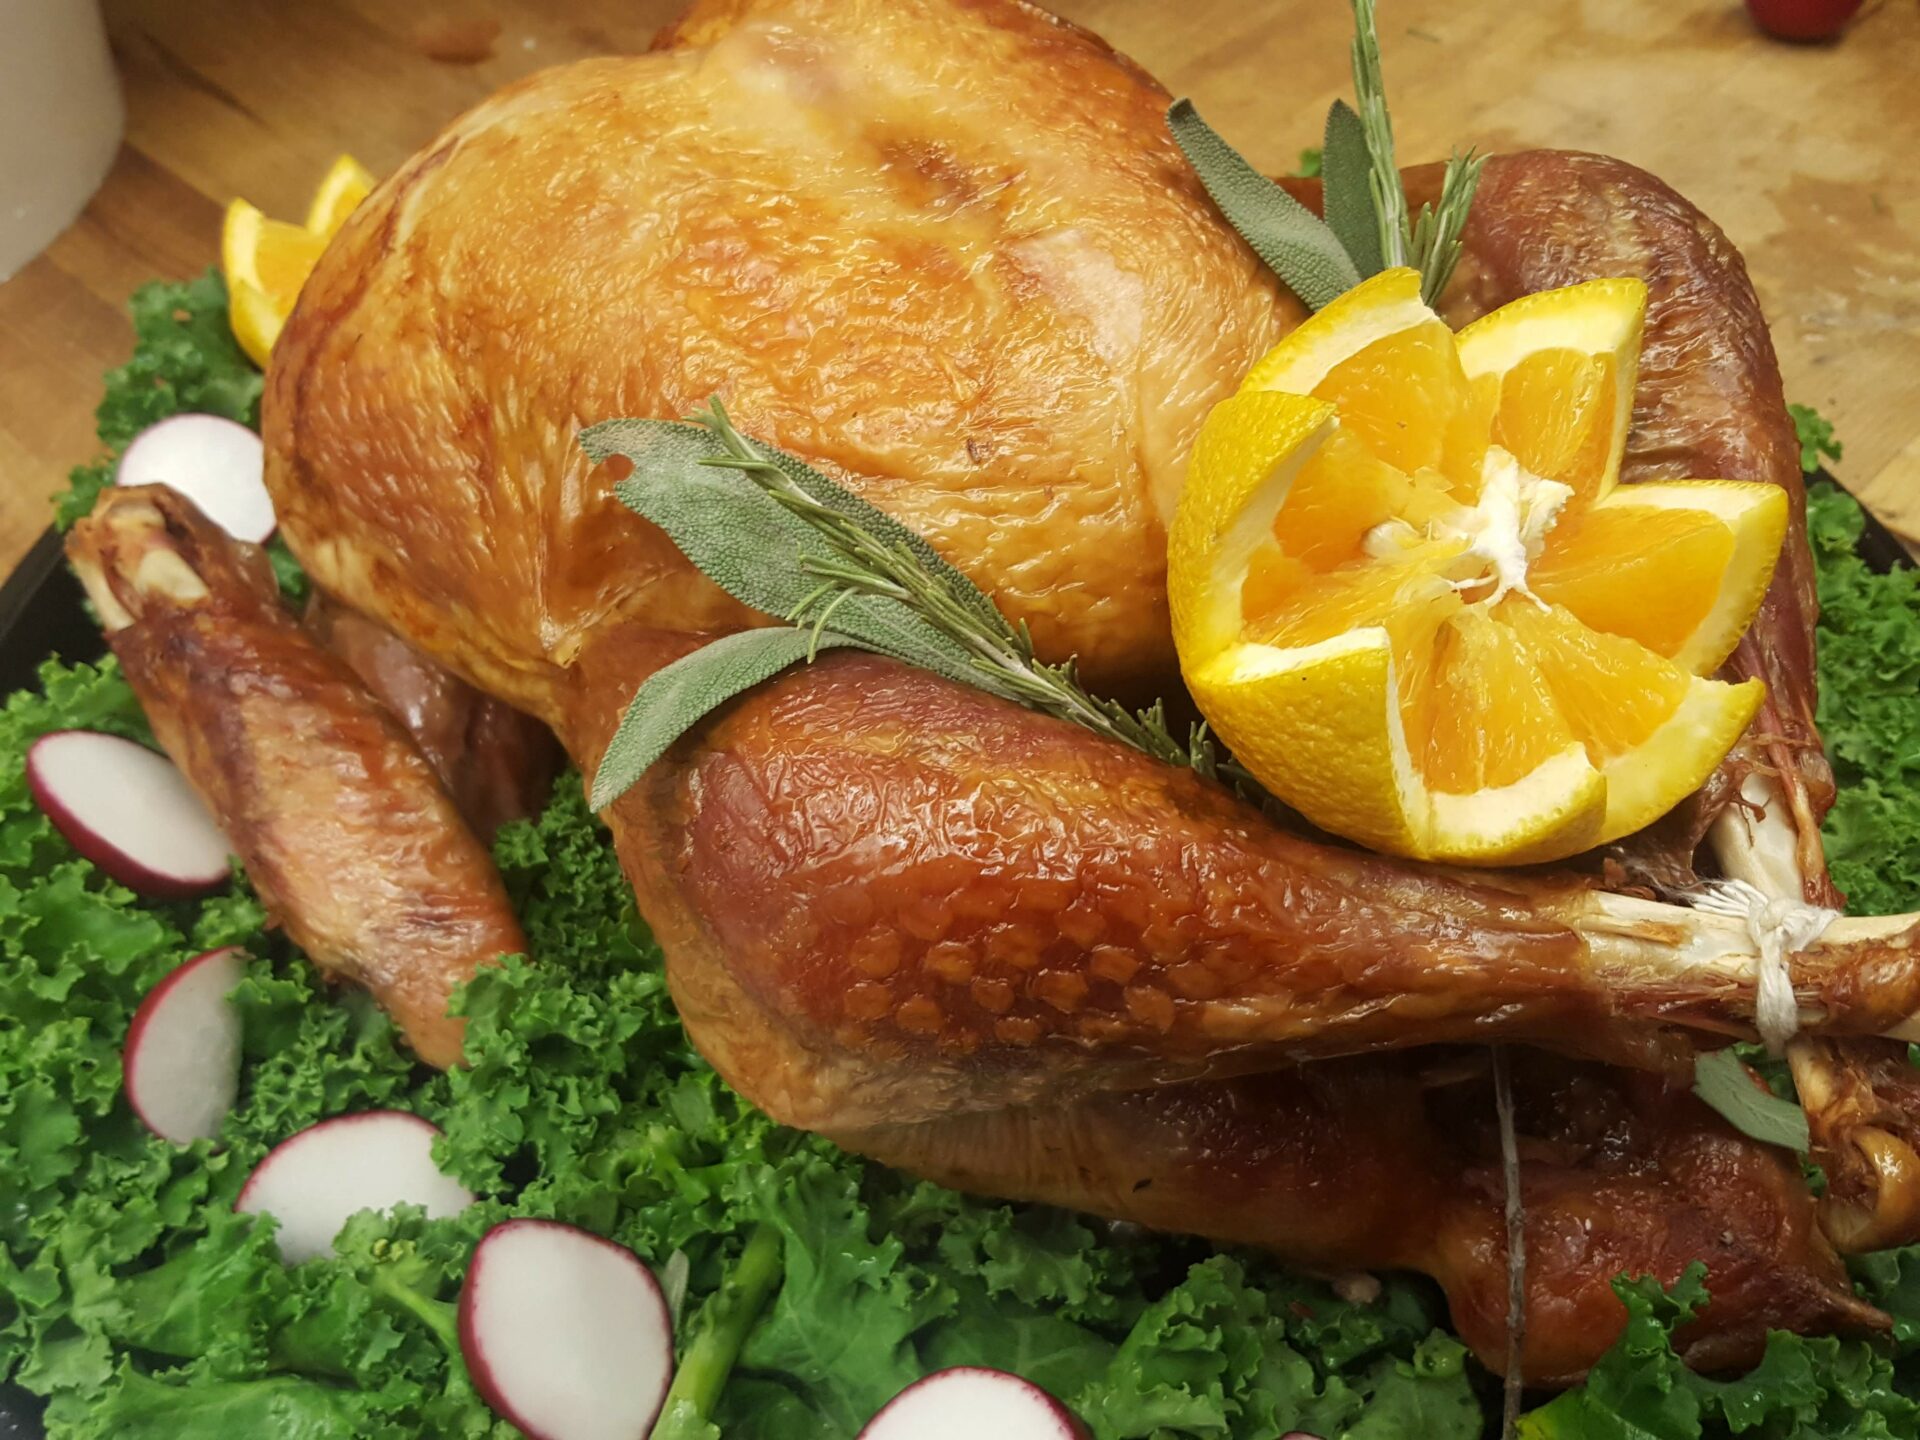 A turkey with orange slices and greens on the side.